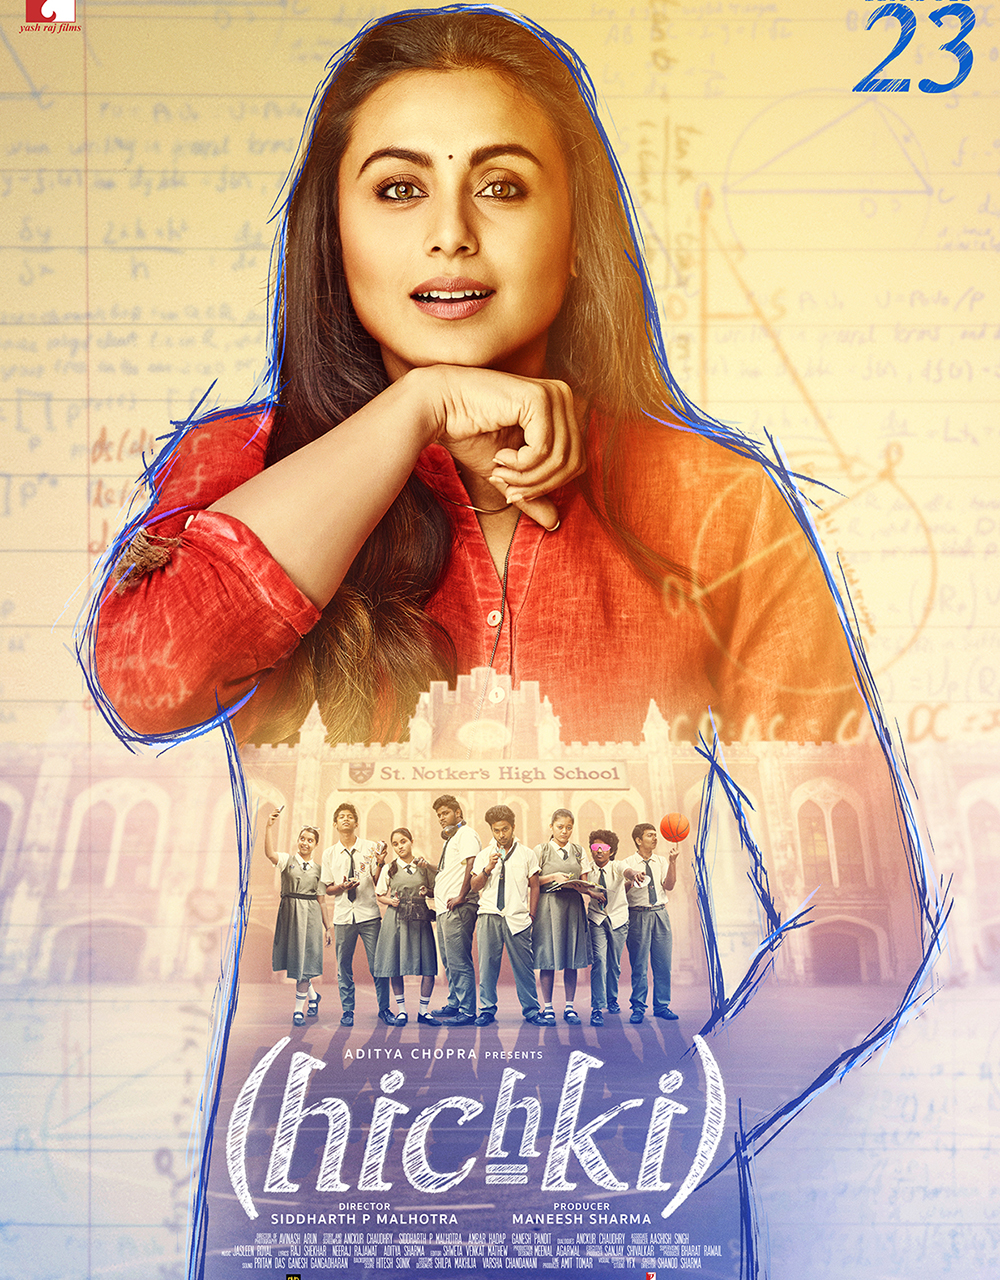 EXCLUSIVE: Rani Mukerji in China for the release of her movie Hichki; to tour 5 cities for promotions